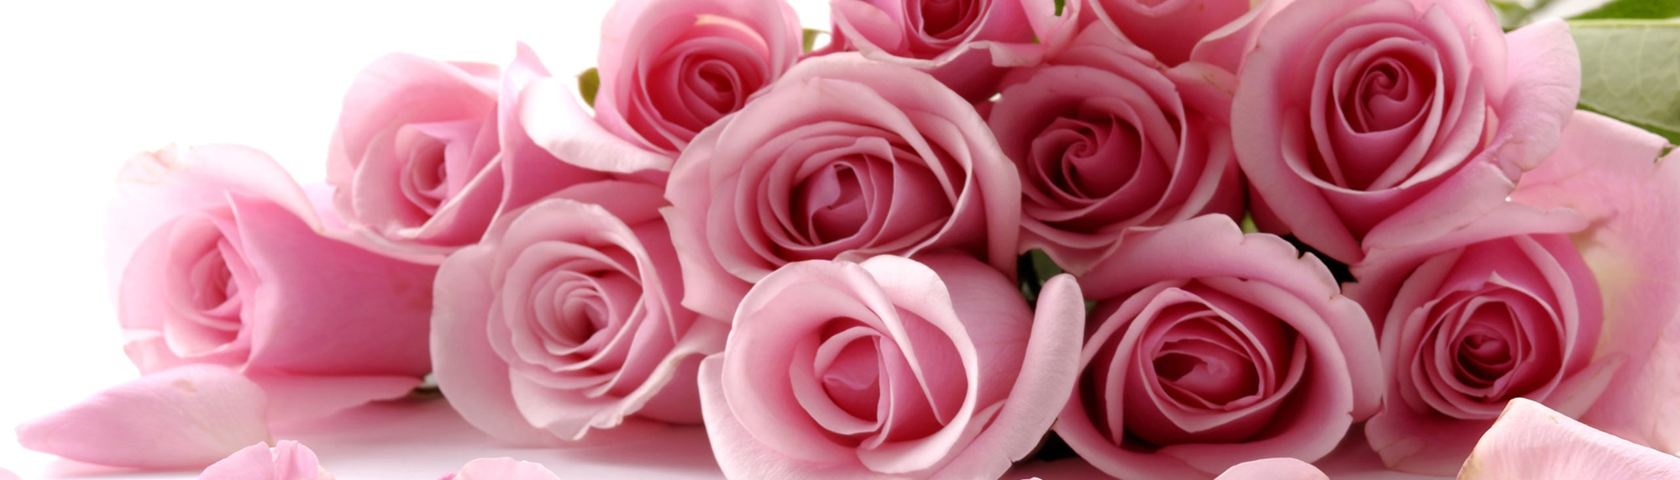 Pink Rose Bouquet • Images • WallpaperFusion by Binary Fortress Software